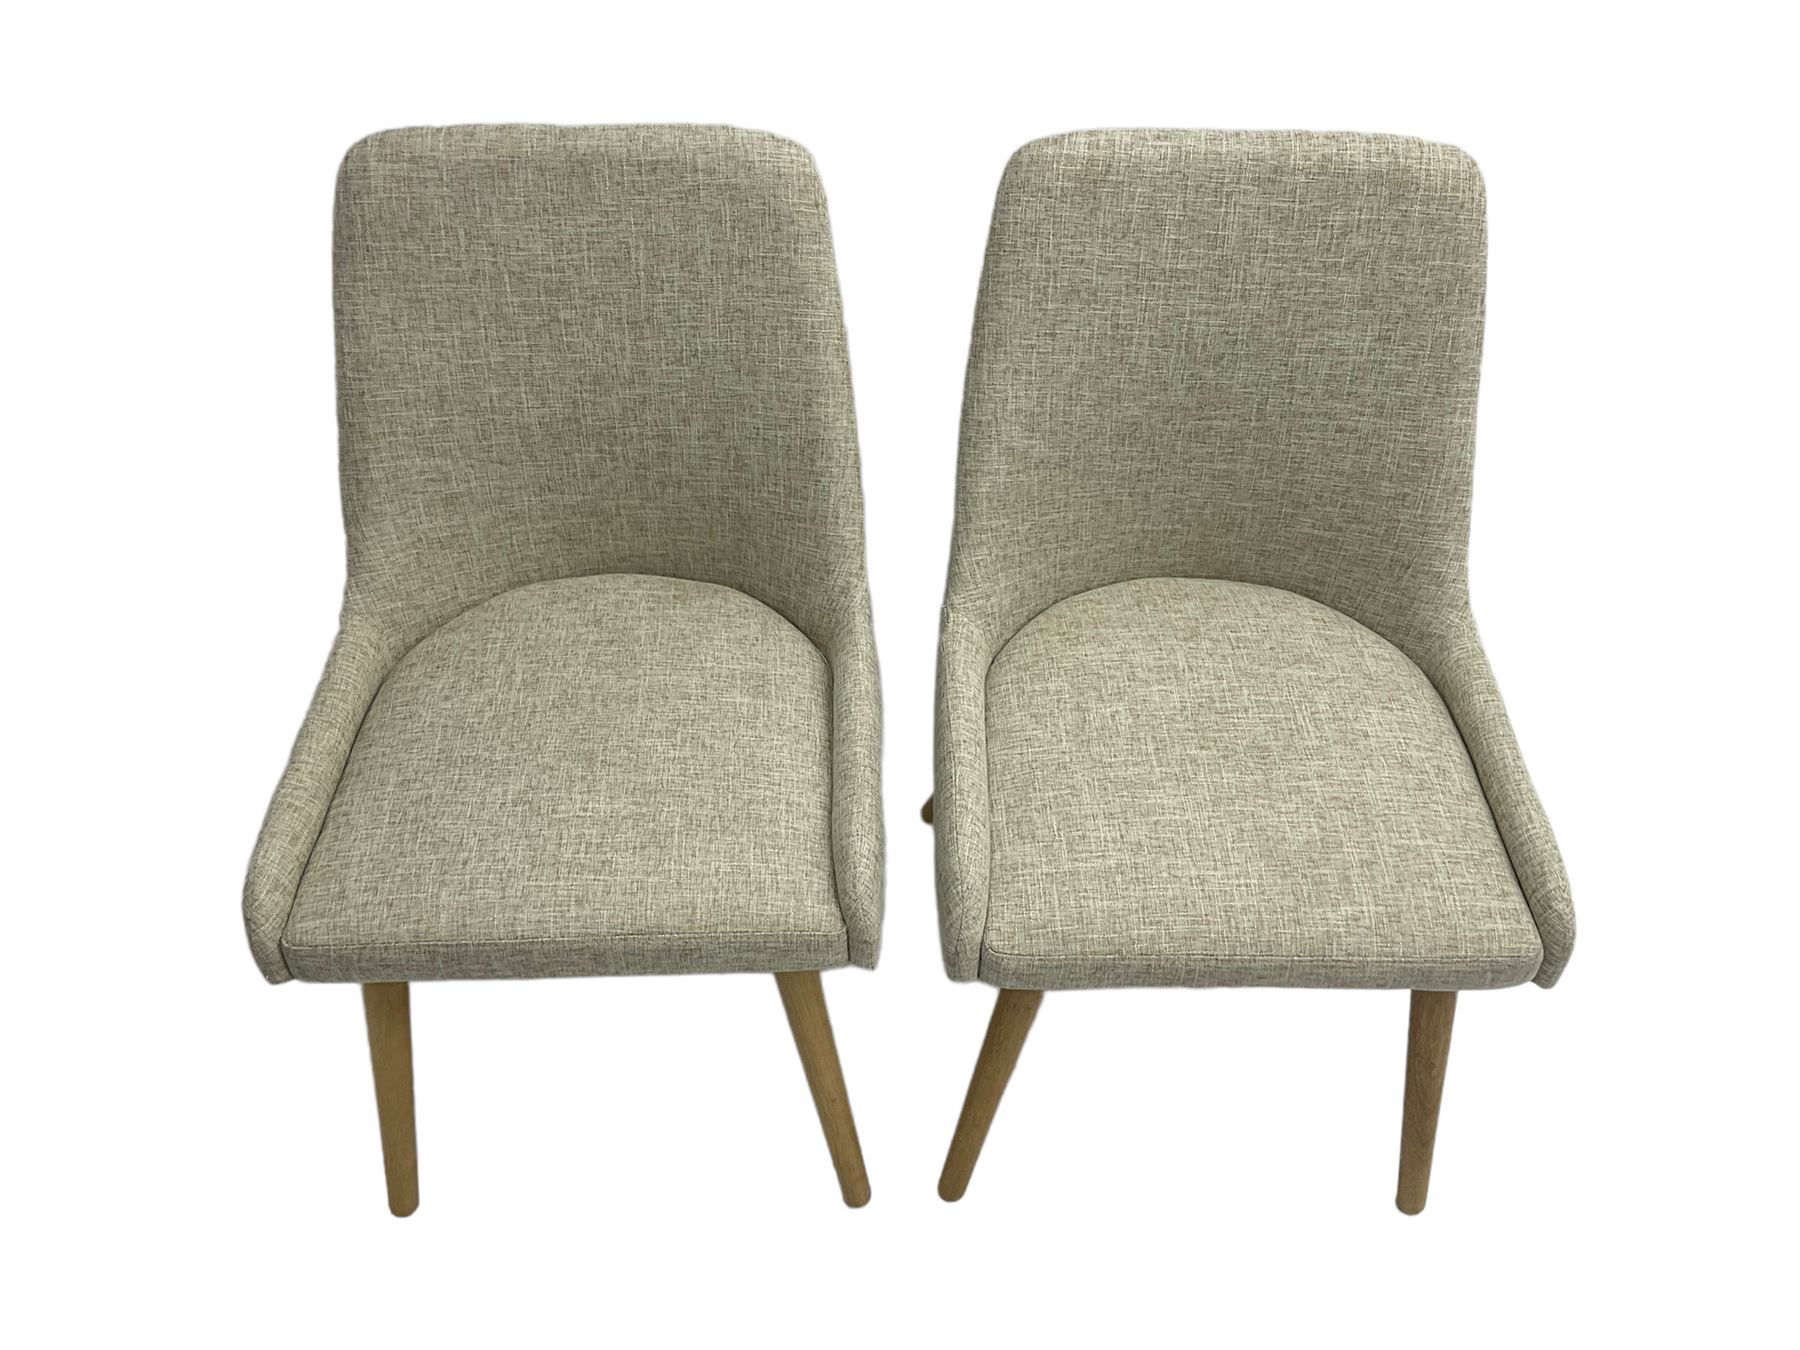 Pair contemporary side chairs - Image 6 of 7